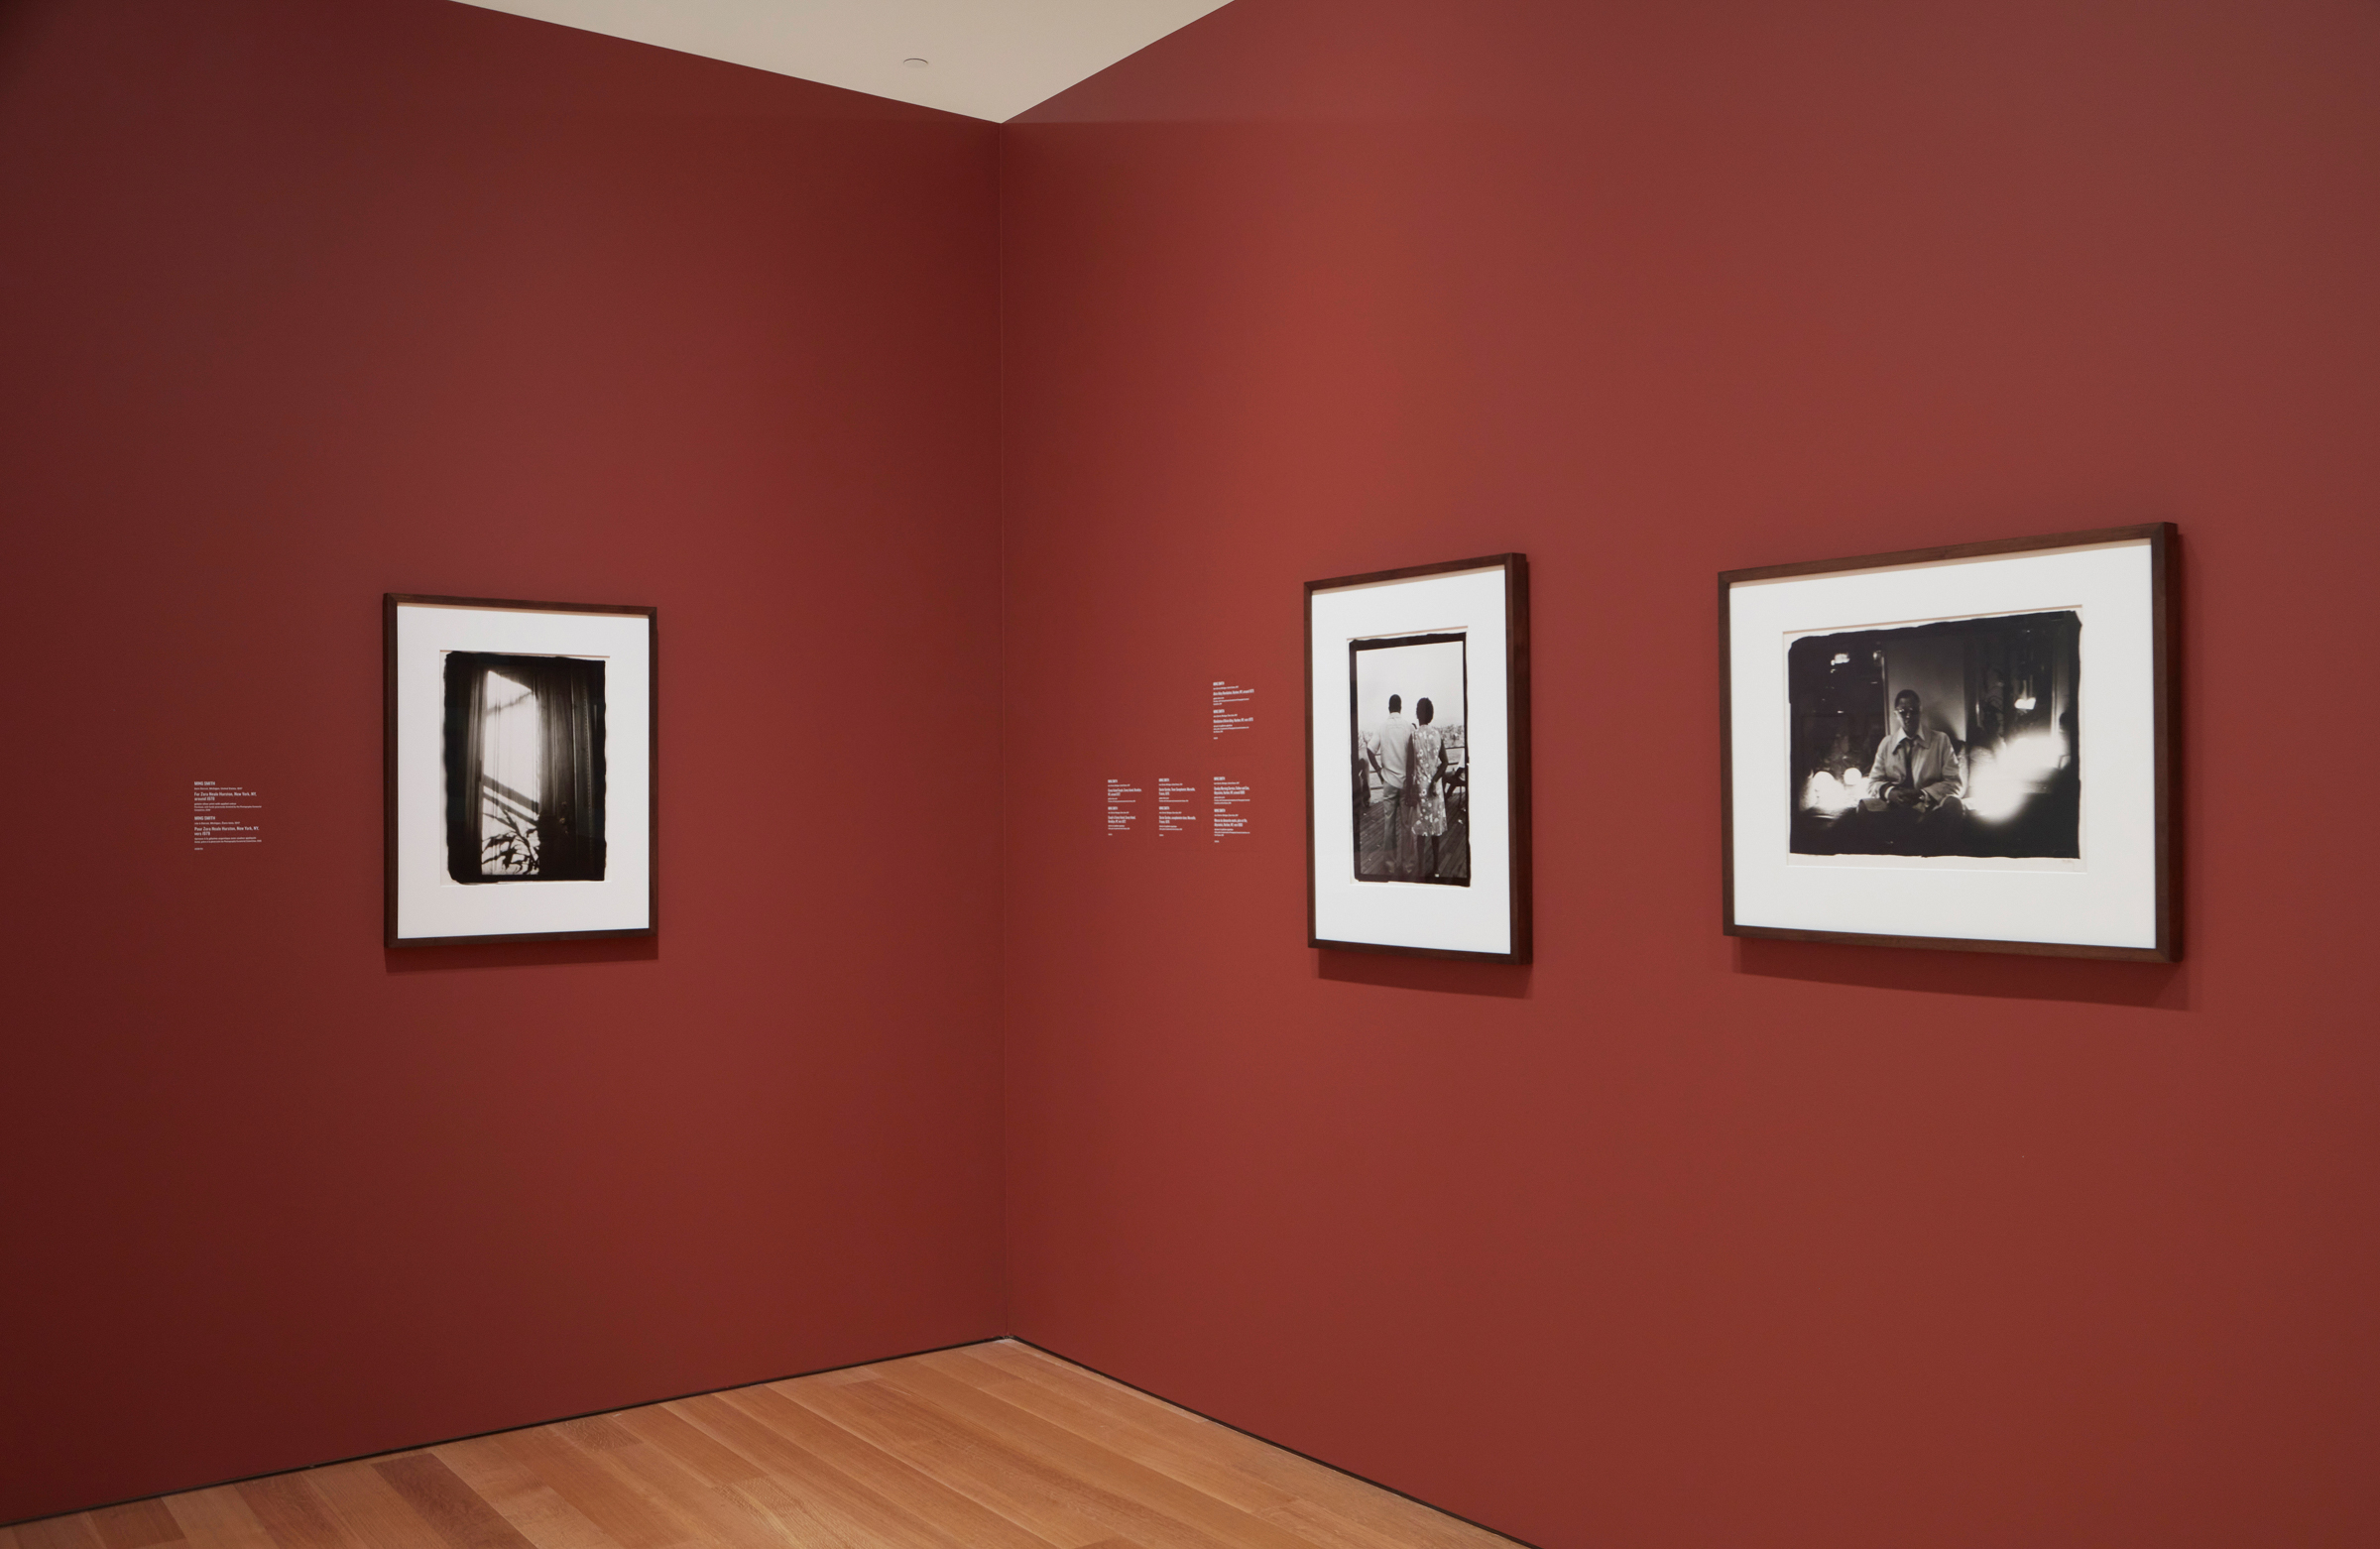     Installation view, Documents, 1960s – 1970s, October 31, 2020 – December 5, 2021. Art Gallery of Ontario. Courtesy of the artists and the Art Gallery of Ontario. Photo © AGO

